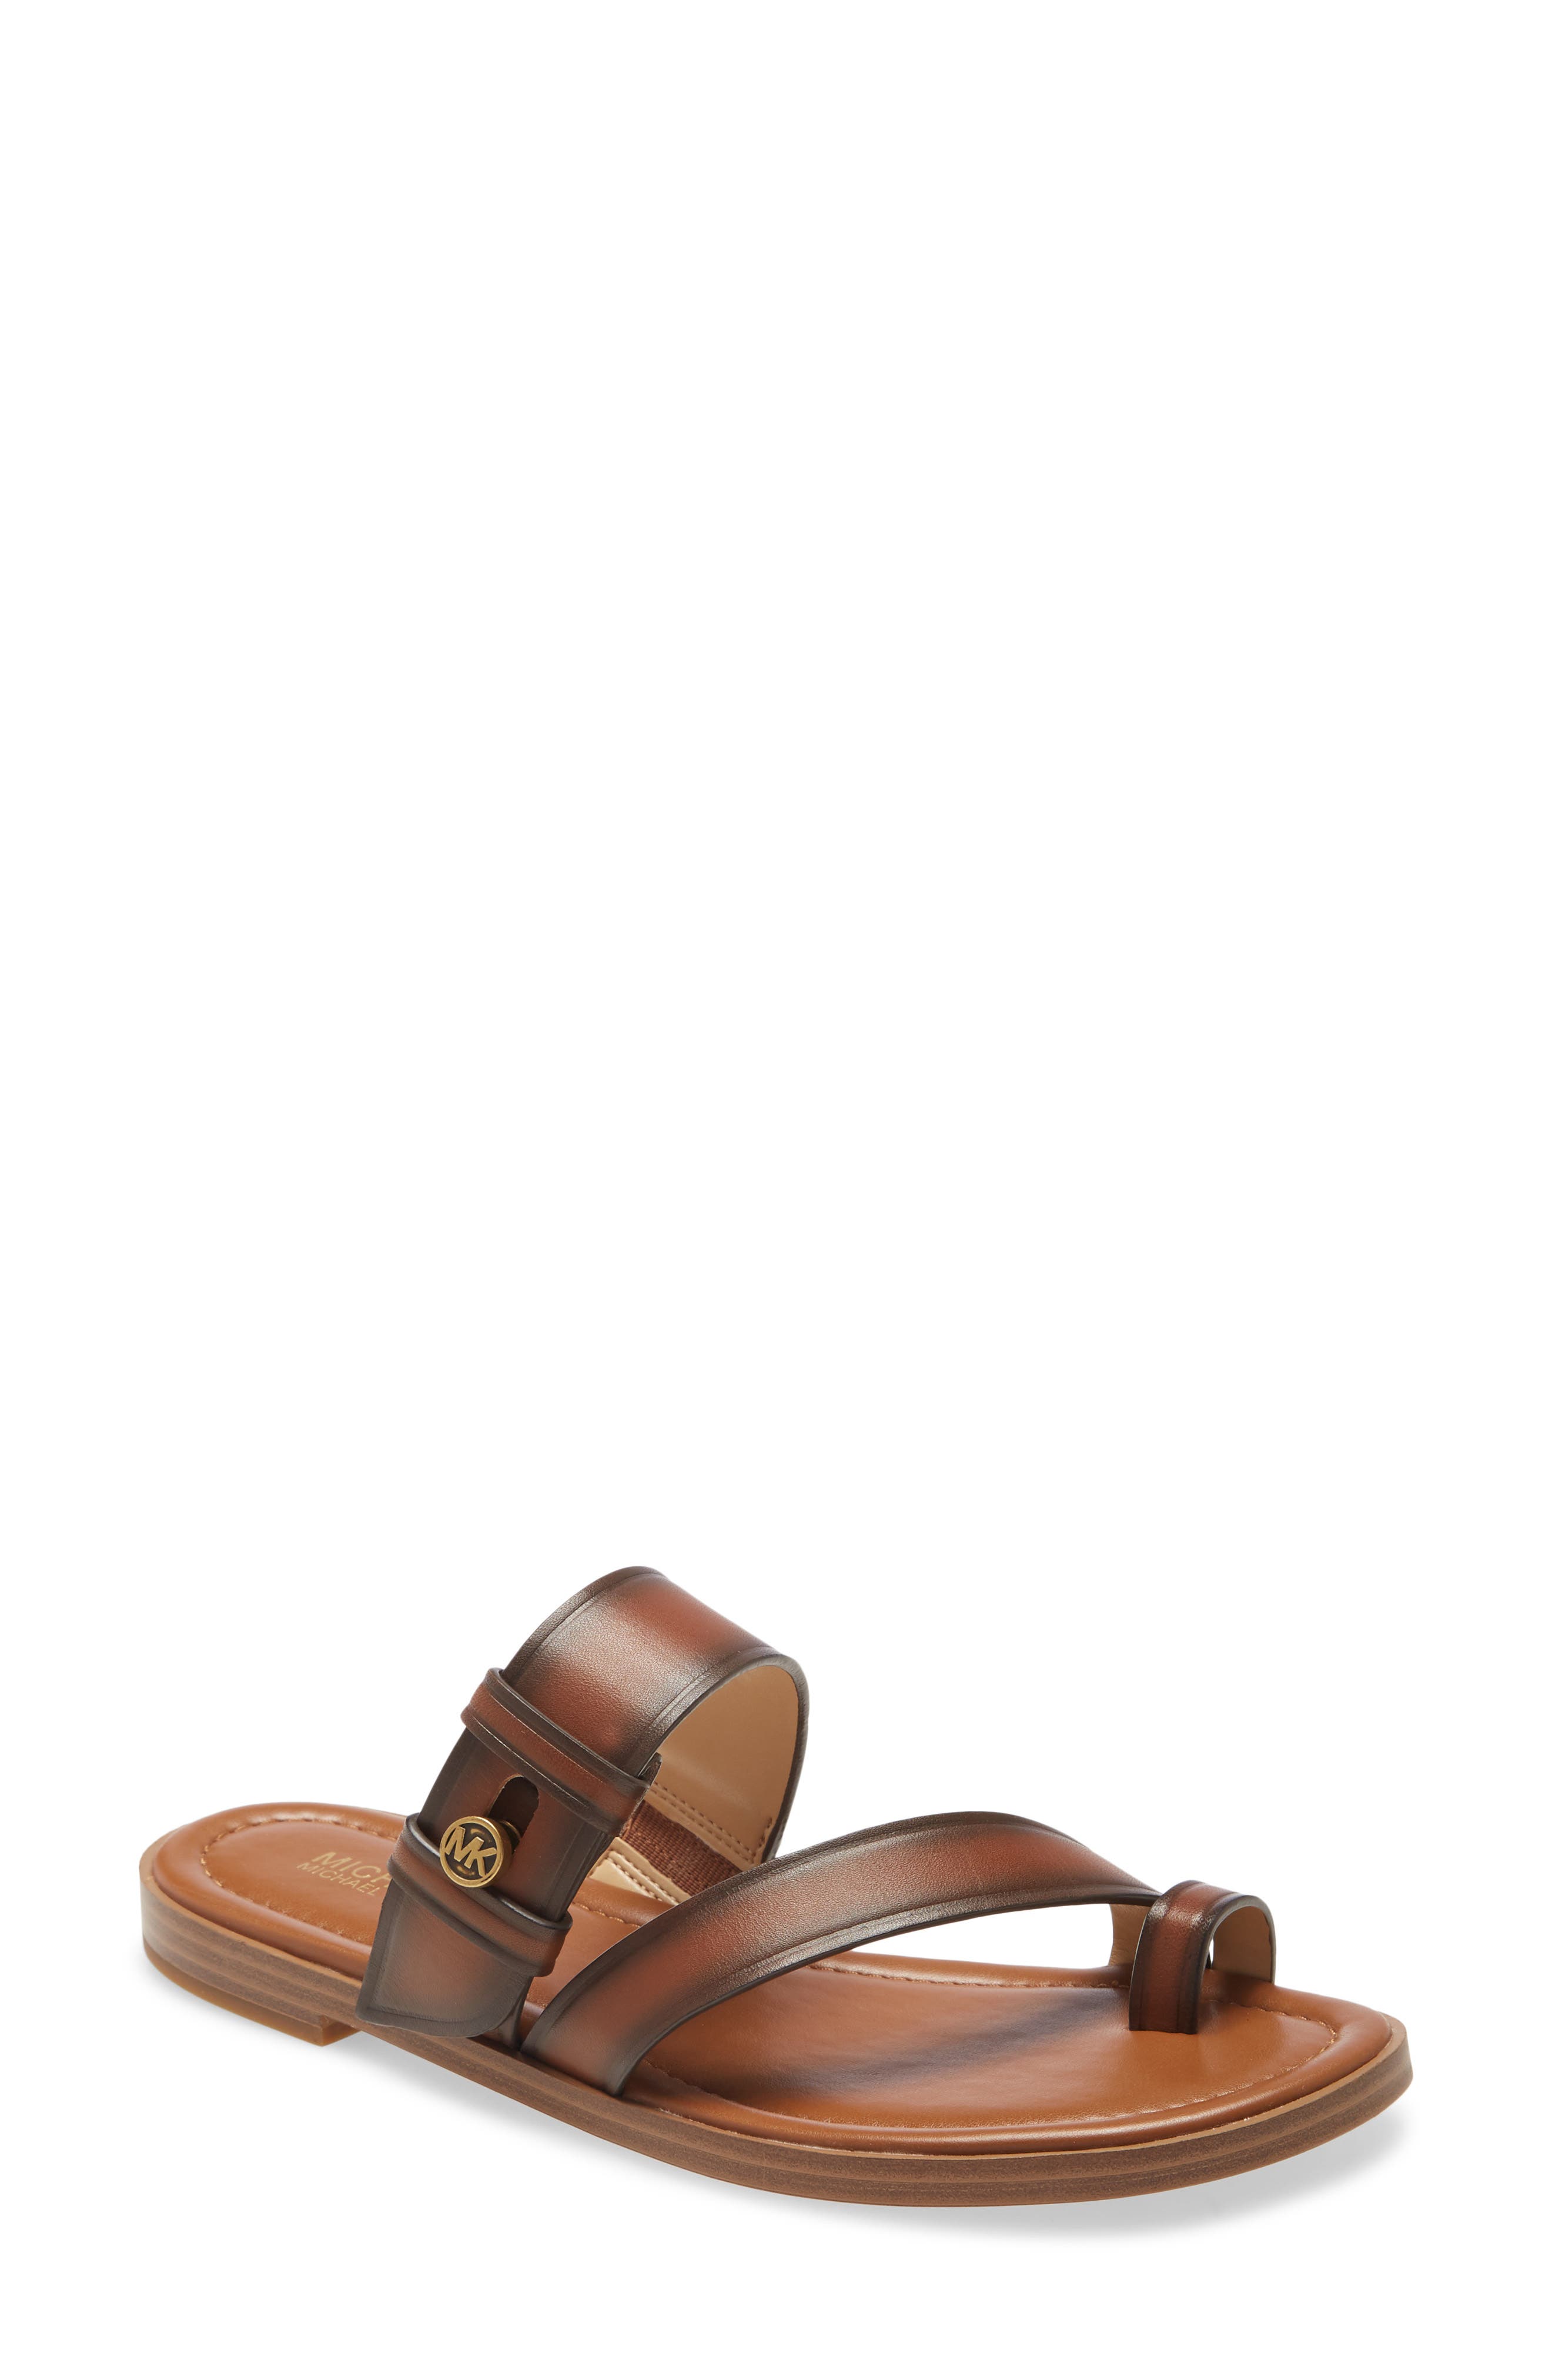 womens leather sandals on sale